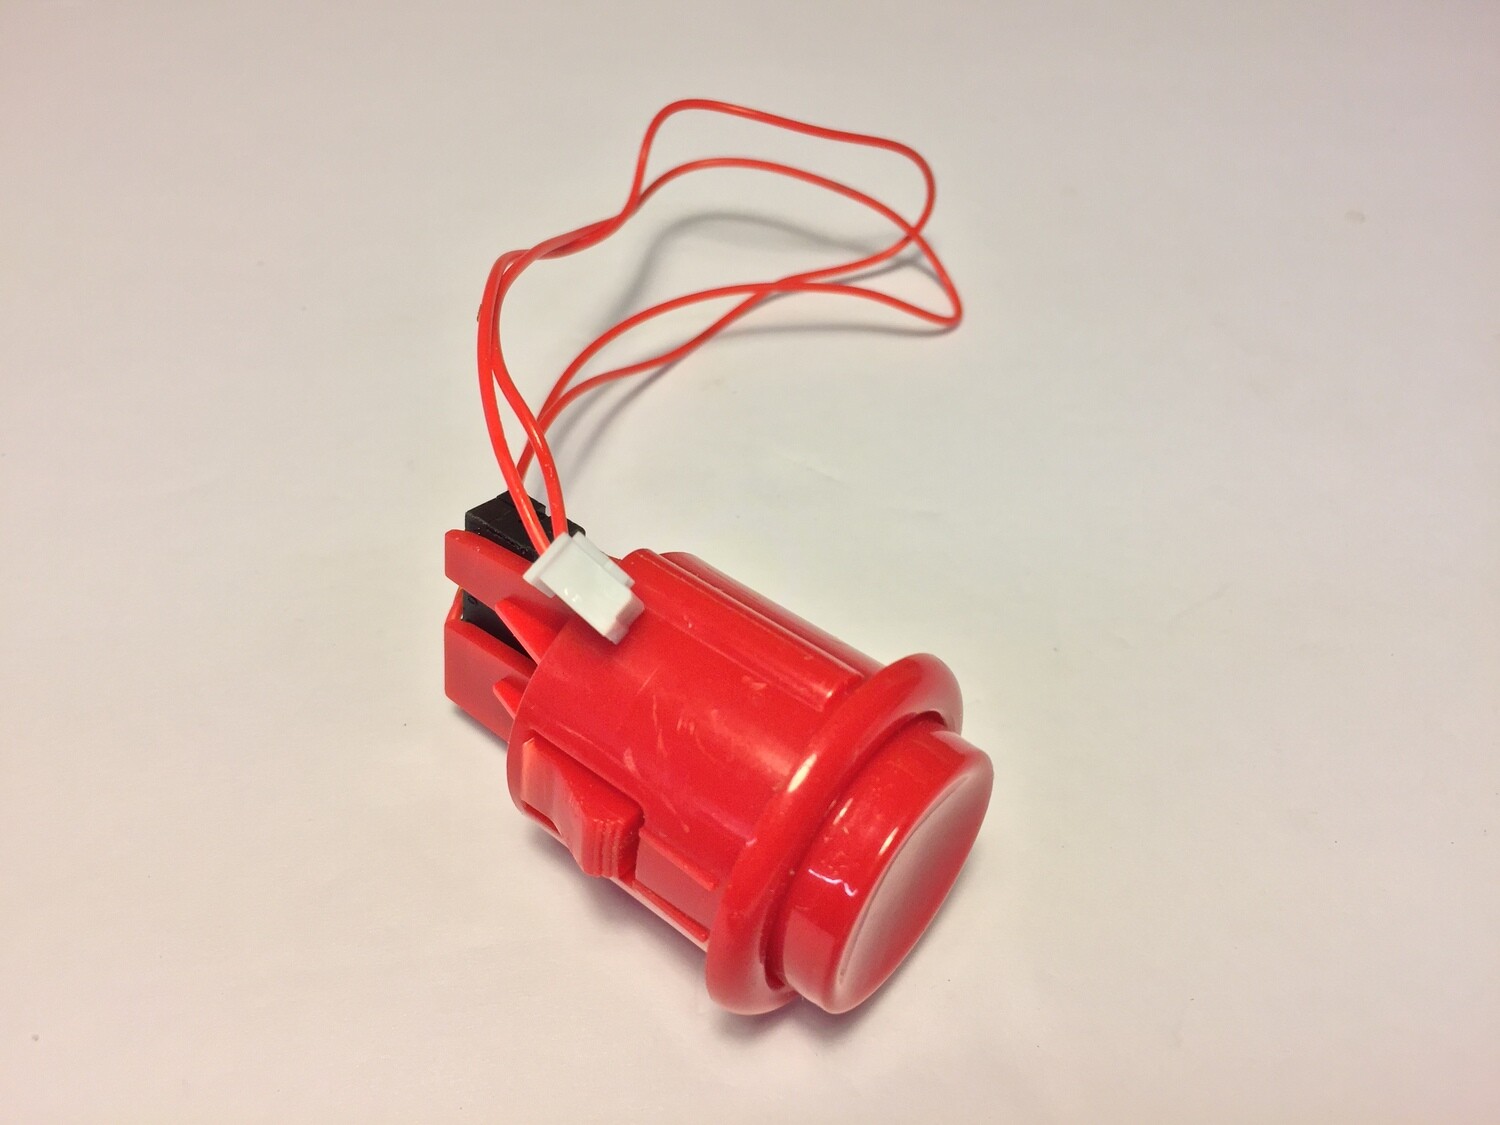 Red Button (ARCADE1UP OEM PART) - Like New Condition